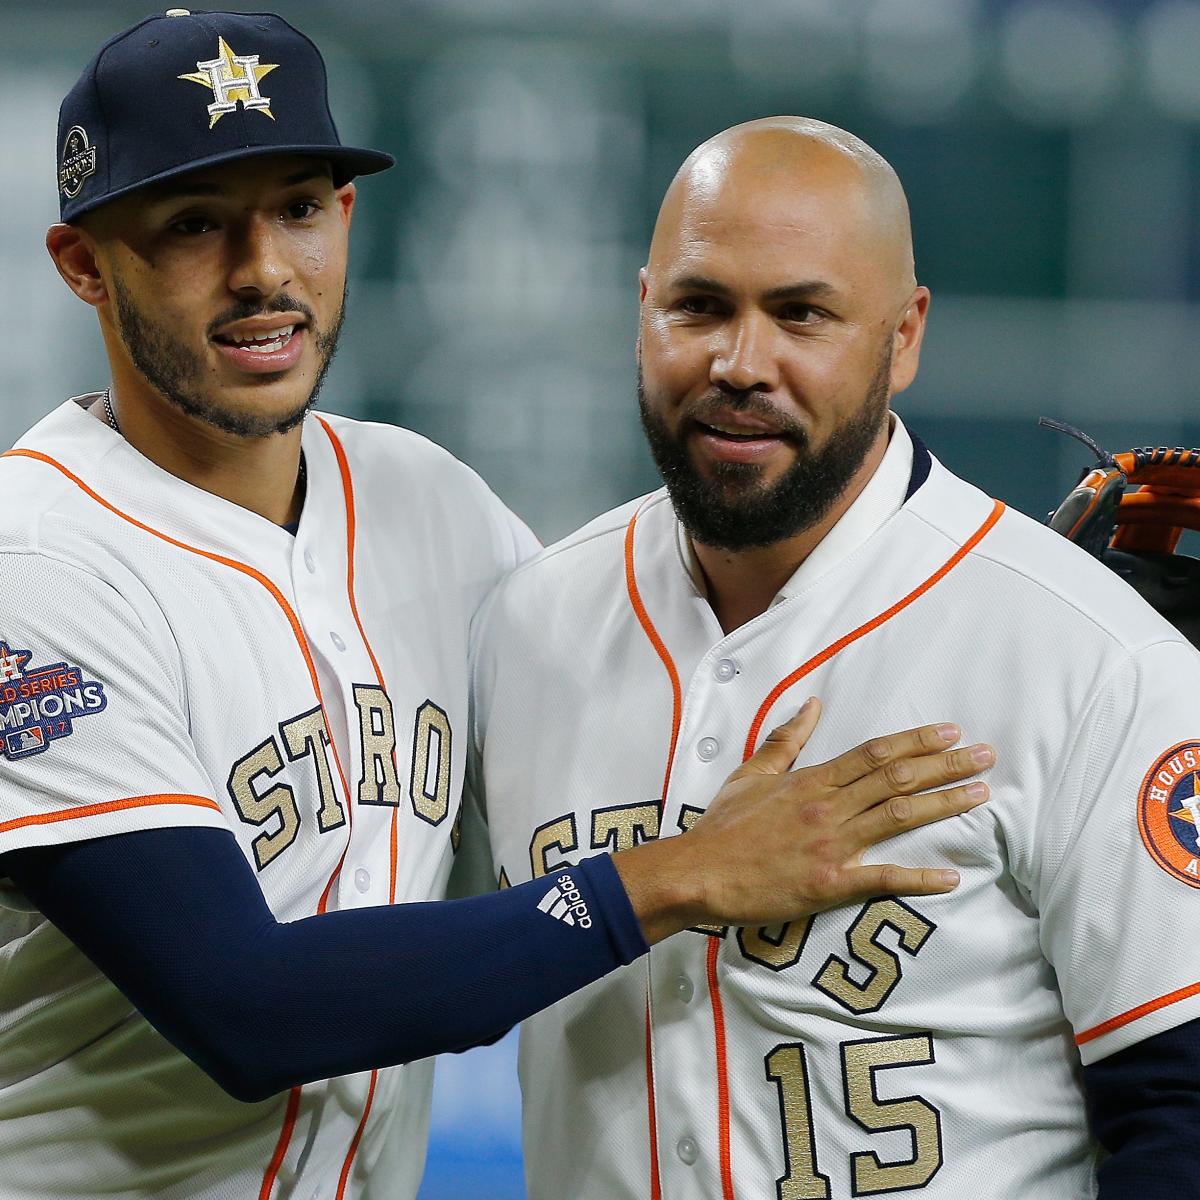 Carlos Correa Bluntly Responds to Being Called 'Cheater' by